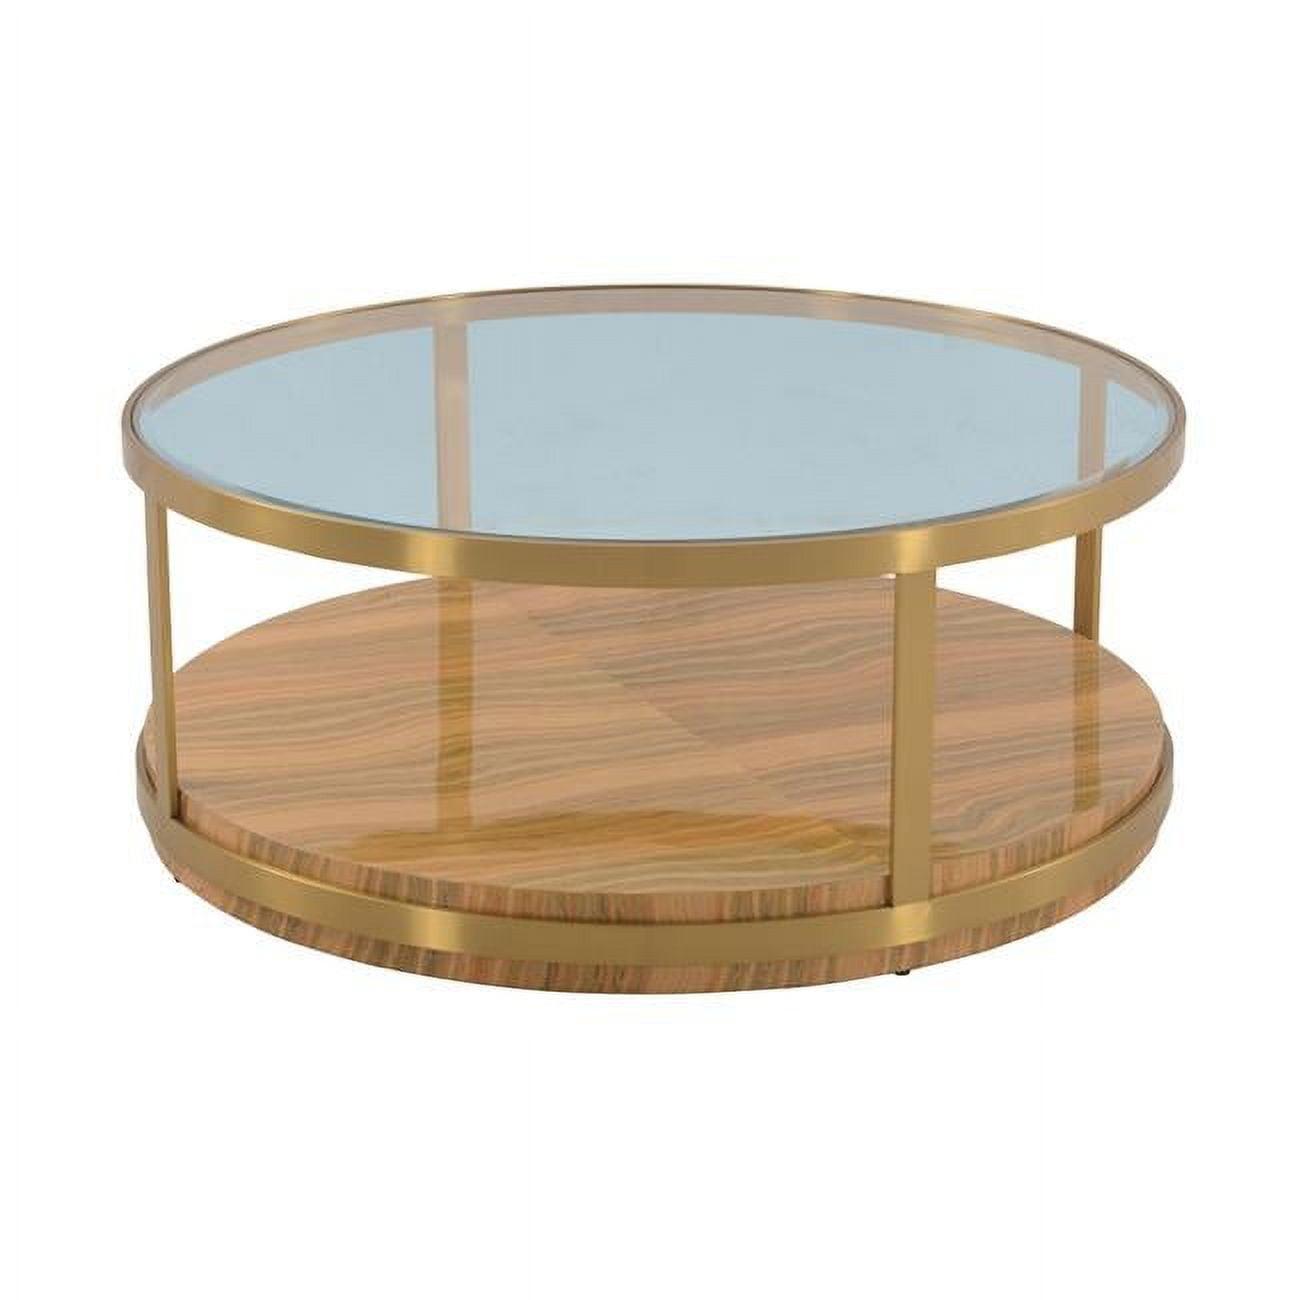 Hattie 43" Round Glass and Wood Coffee Table with Gold Storage Shelf